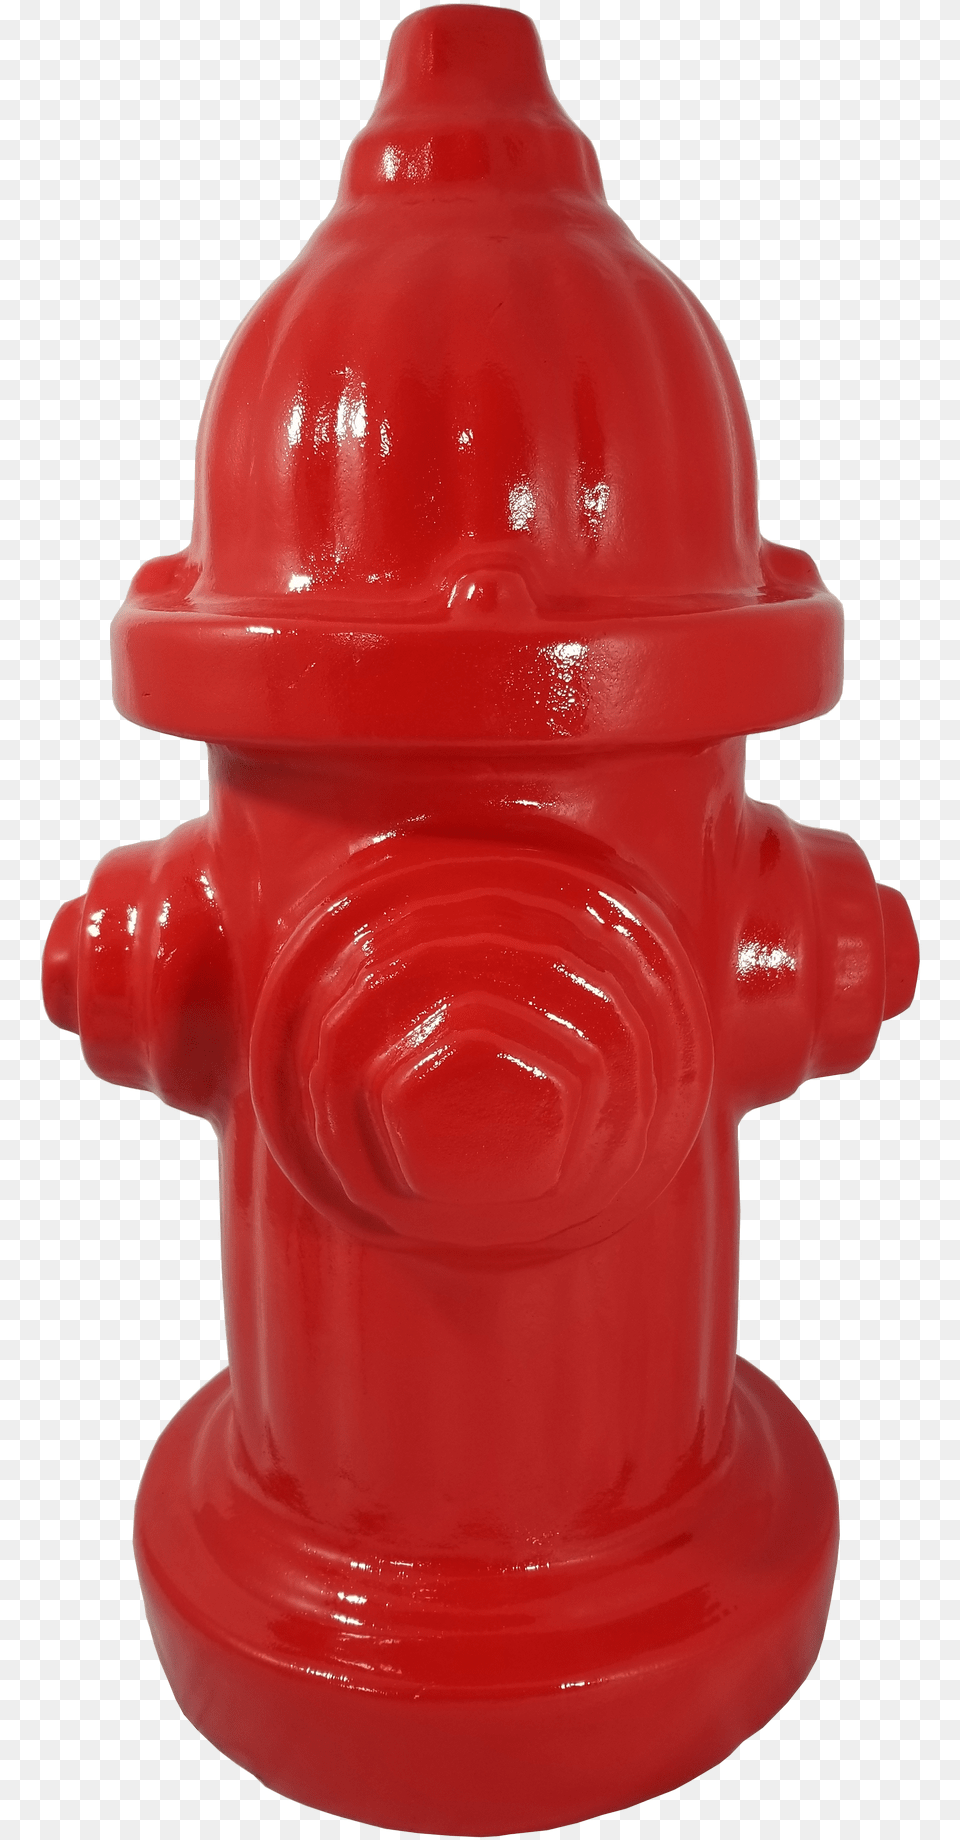 Fire Hydrant Image Fire Hydrant, Fire Hydrant, Bottle, Shaker Png